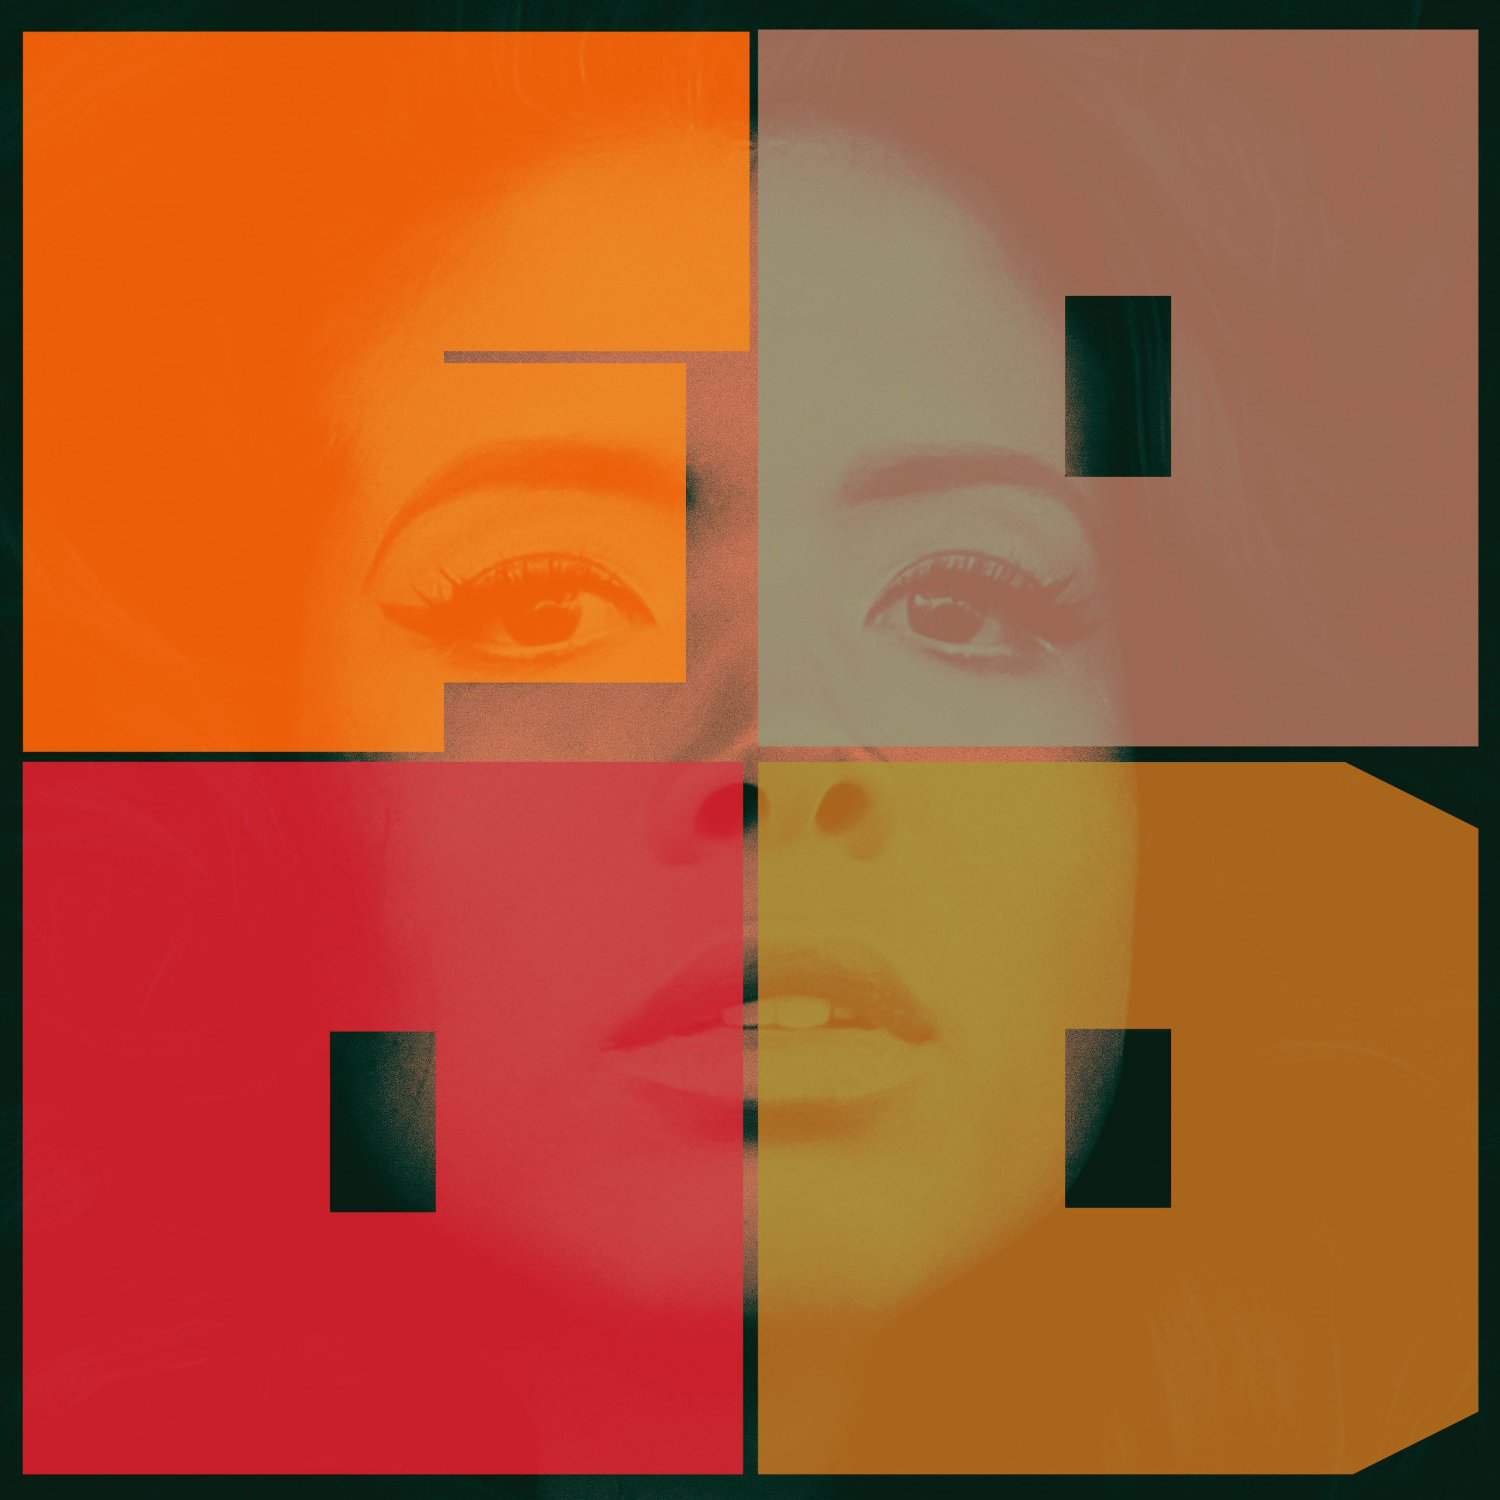 News Added May 01, 2013 R&B boundary-pusher Kelis' next album is finished and is due this September. The follow-up to 2010's Flesh Tone has provisionally been titled FOOD. The album was produced by TV on the Radio's Dave Sitek, who will release it on his label Federal Prism. The first track to be released from […]